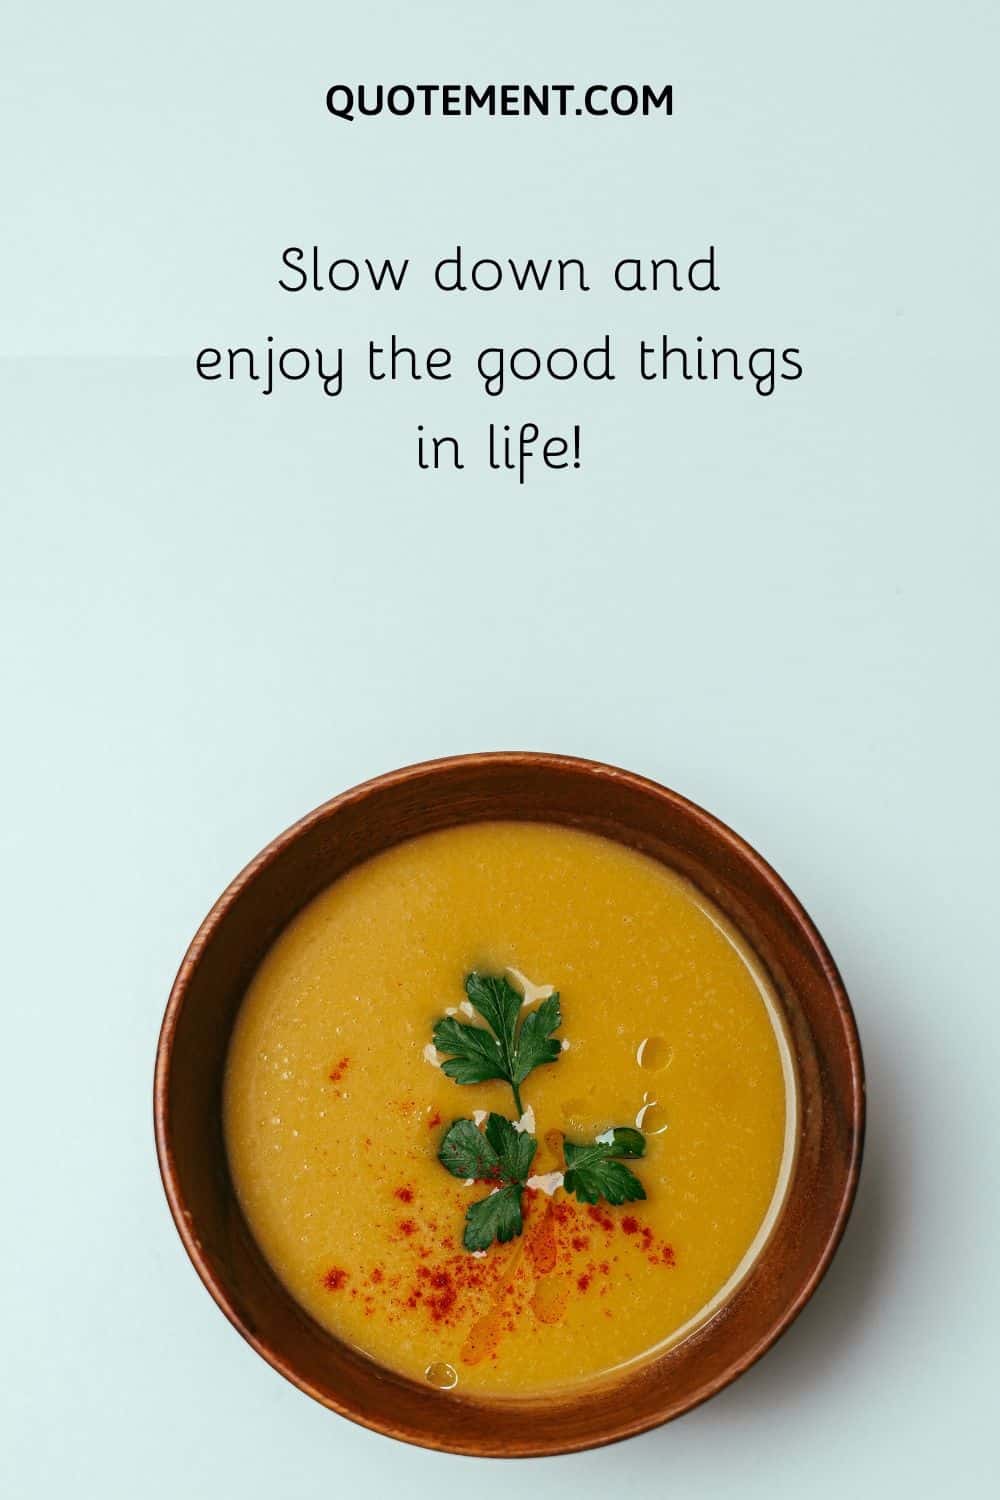 Slow down and enjoy the good things in life